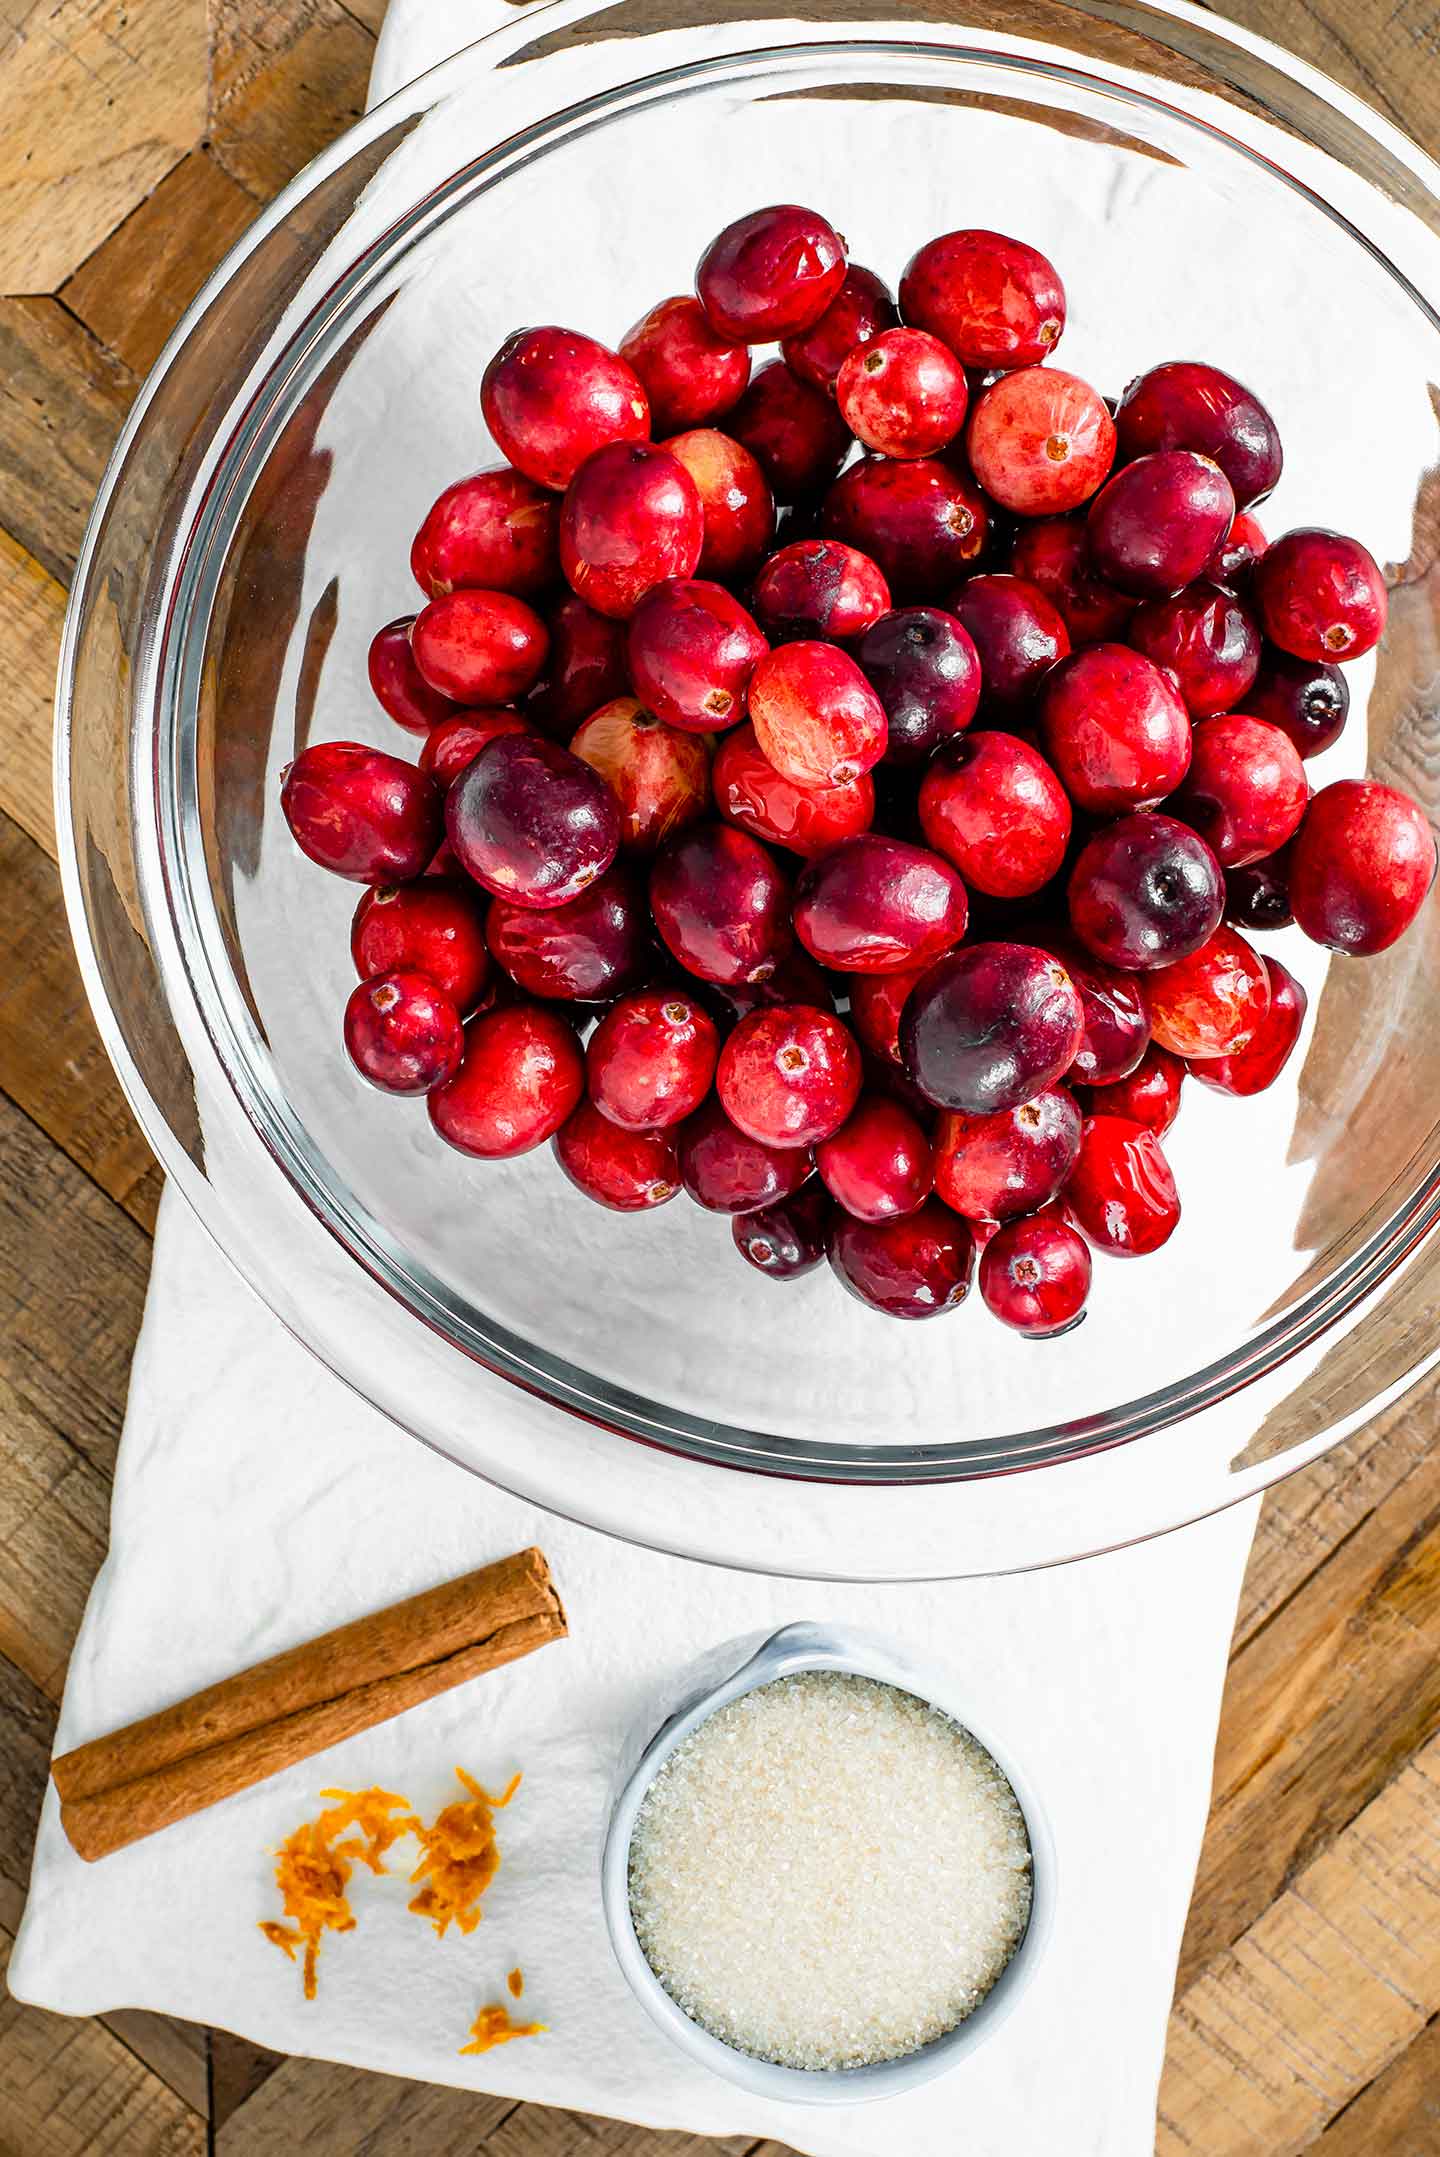 Top down view of fresh cranberries in a glass bowl. A small dish of cane sugar, some orange zest, and a cinnamon stick lay on a white tray atop a wooden table.